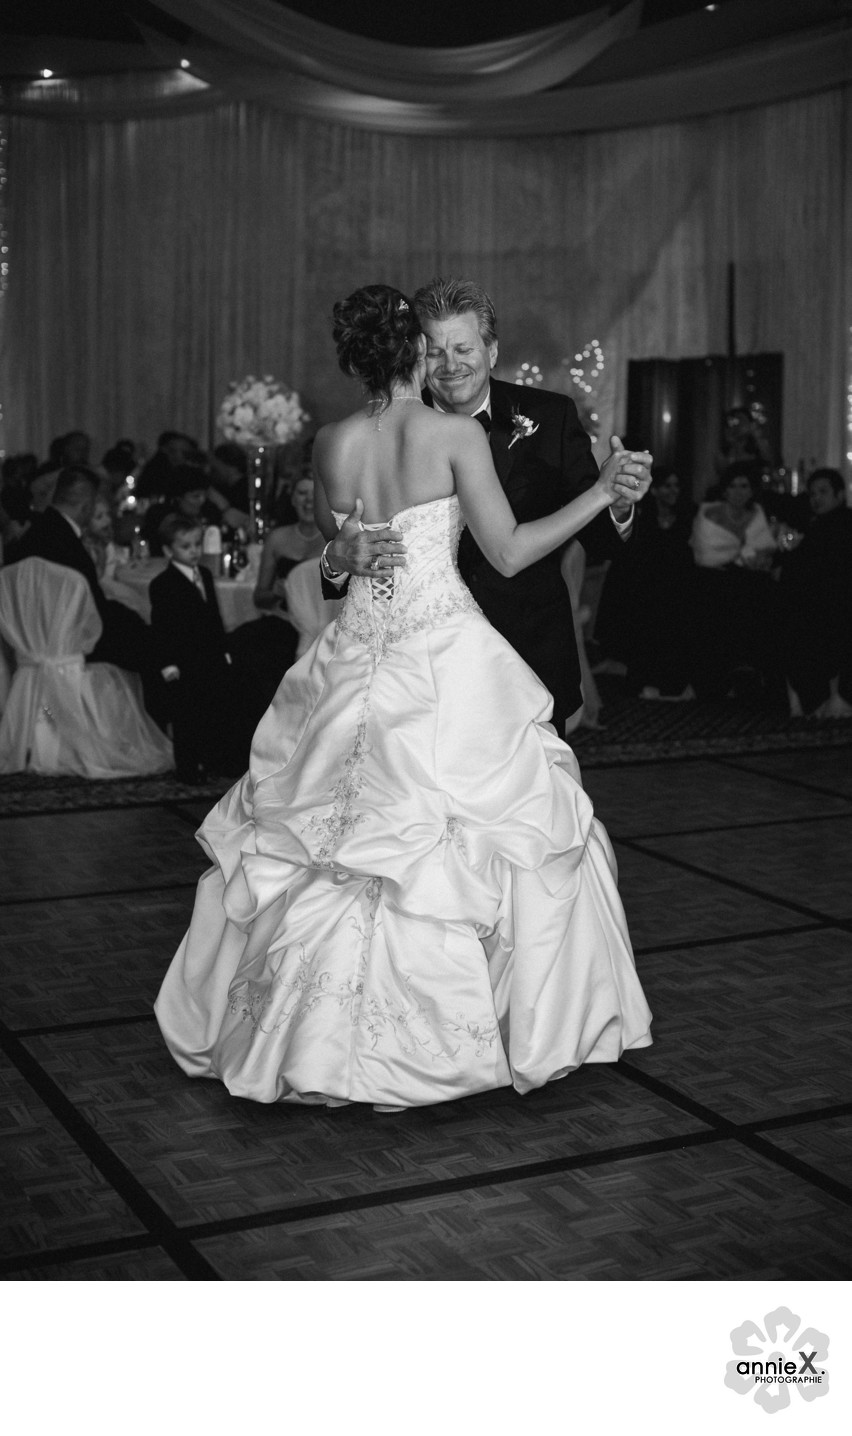 John Force dancing with daughter Ashley at wedding